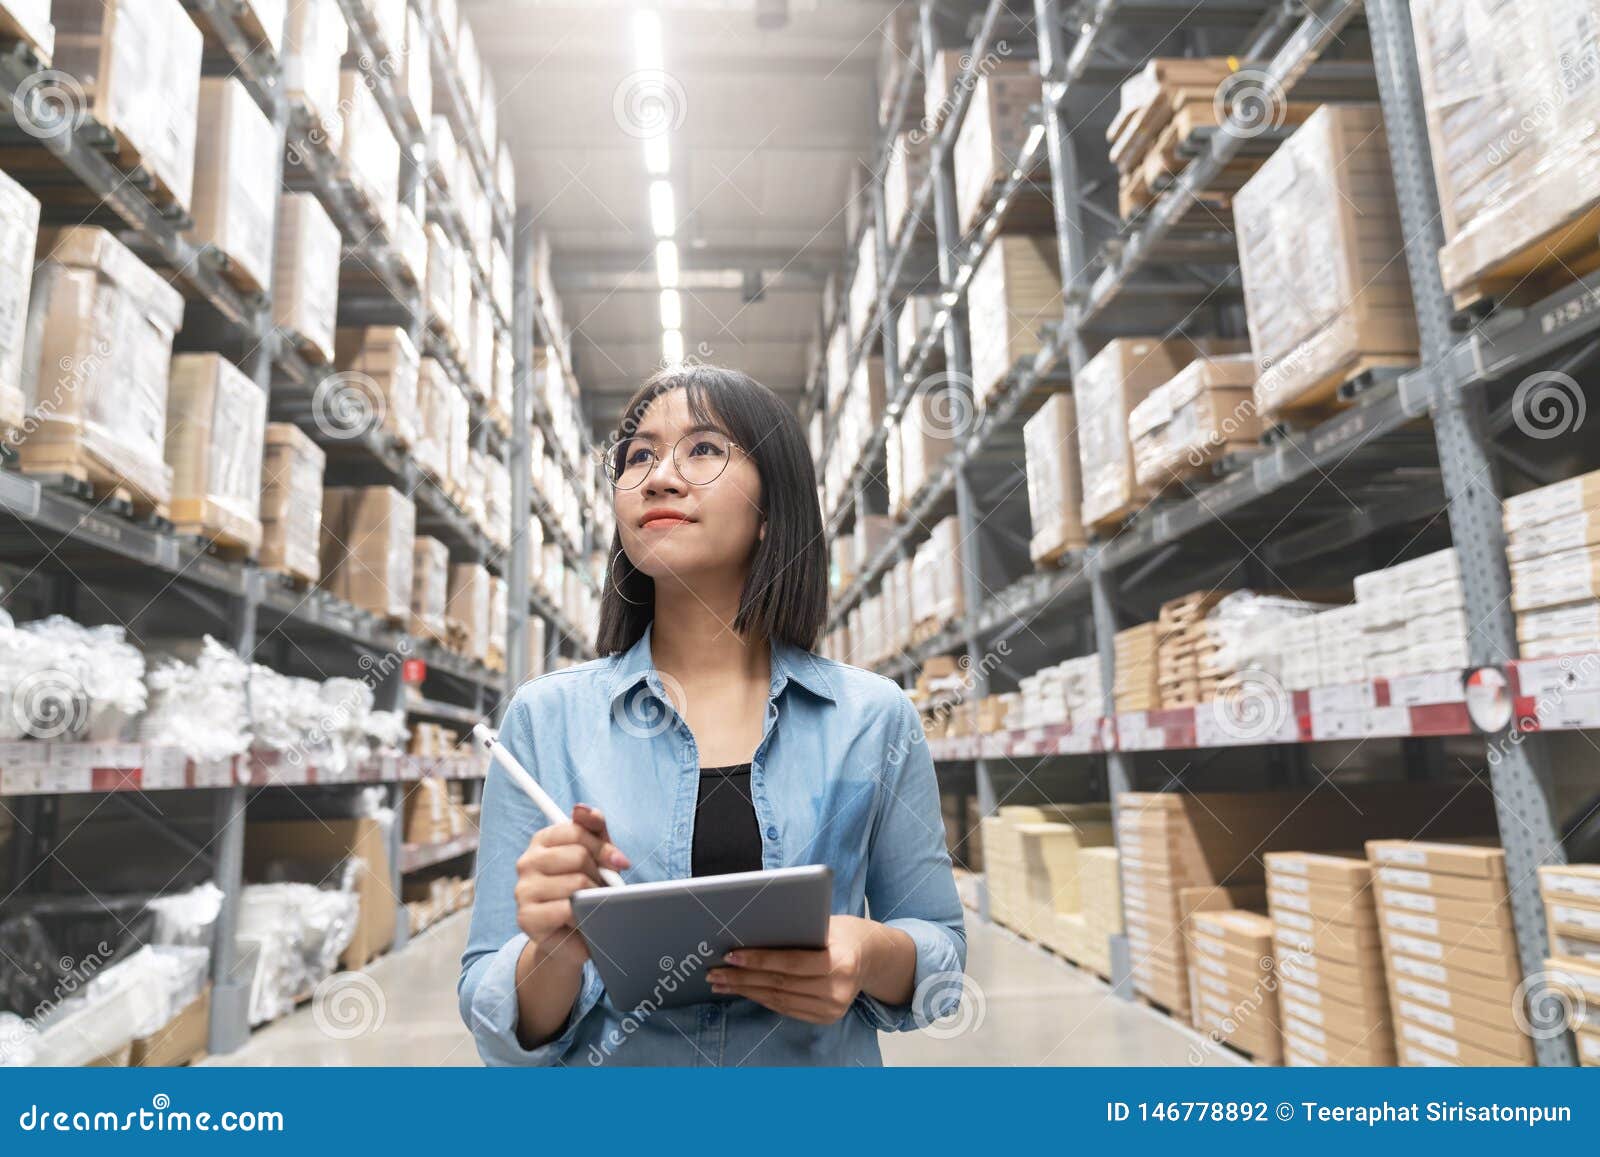 candid of young attractive asian woman auditor or trainee staff work looking up stocktaking inventory in warehouse store by